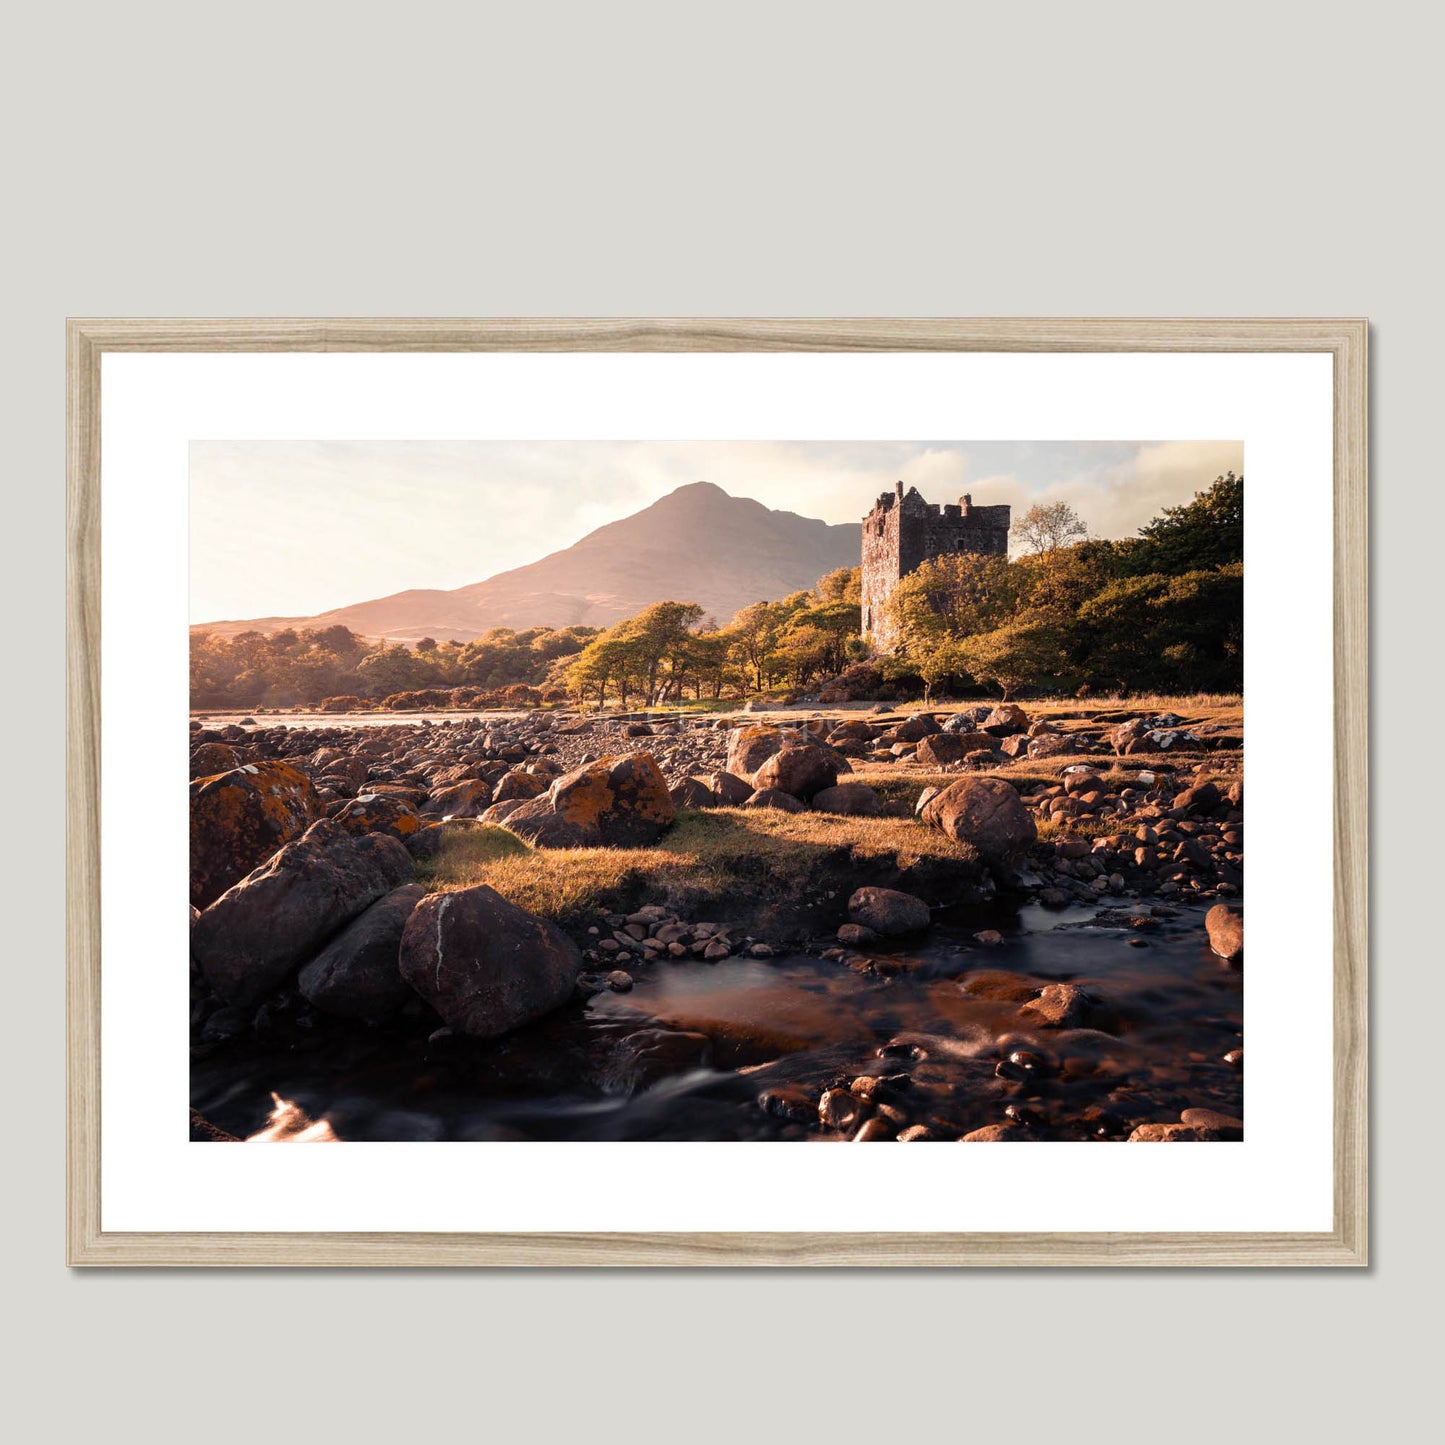 Clan MacLaine of Lochbuie - Moy Castle - Framed Photo Print 28"x20" Natural